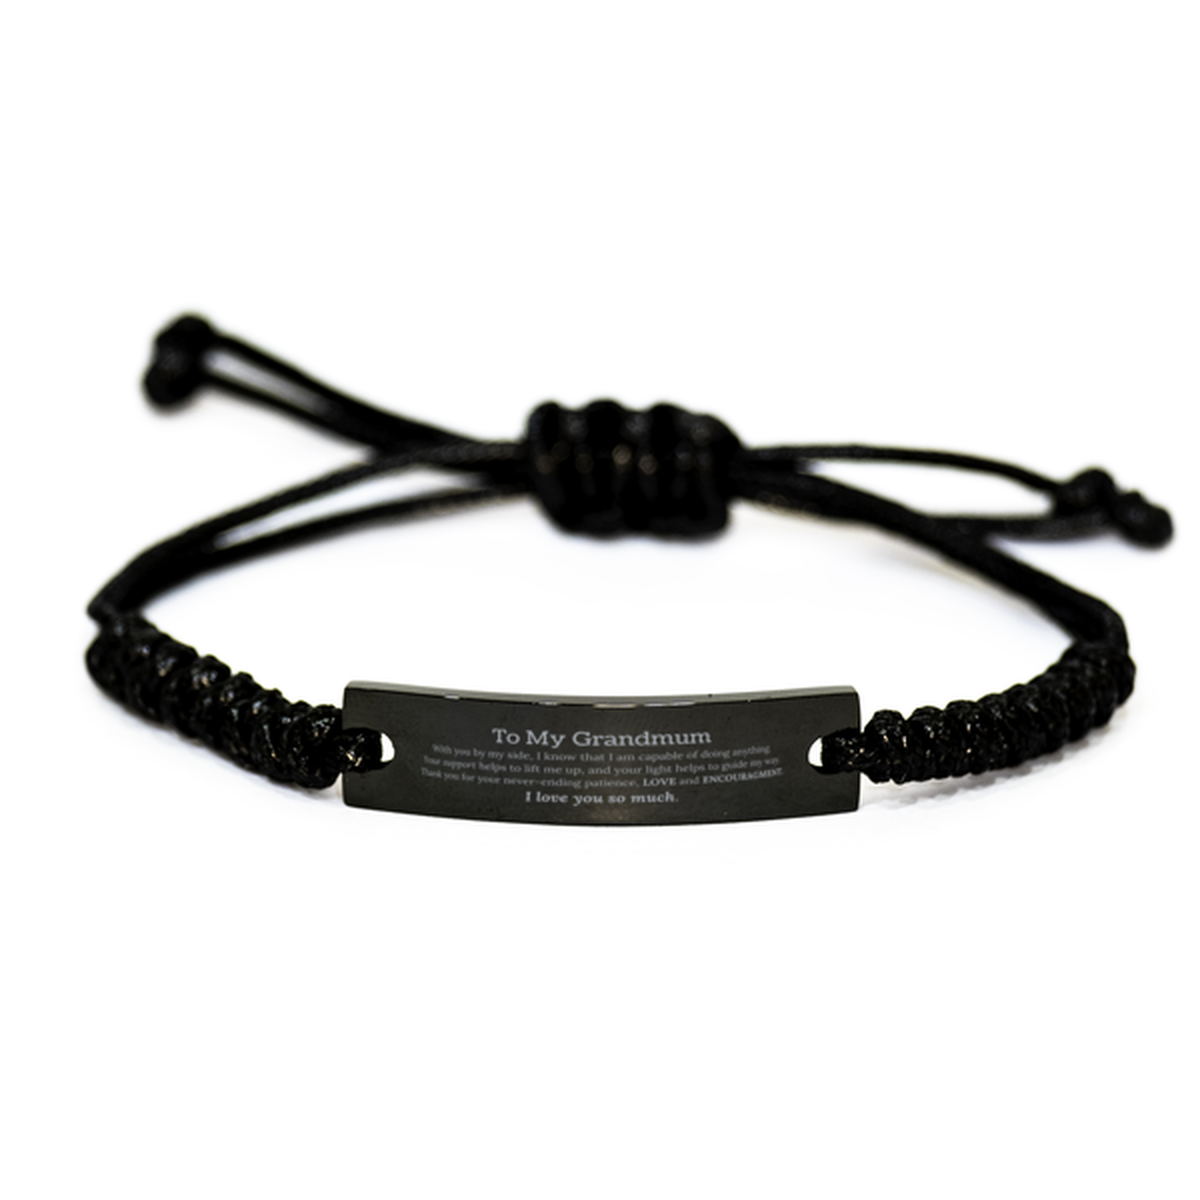 Appreciation Grandmum Black Rope Bracelet Gifts, To My Grandmum Birthday Christmas Wedding Keepsake Gifts for Grandmum With you by my side, I know that I am capable of doing anything. I love you so much